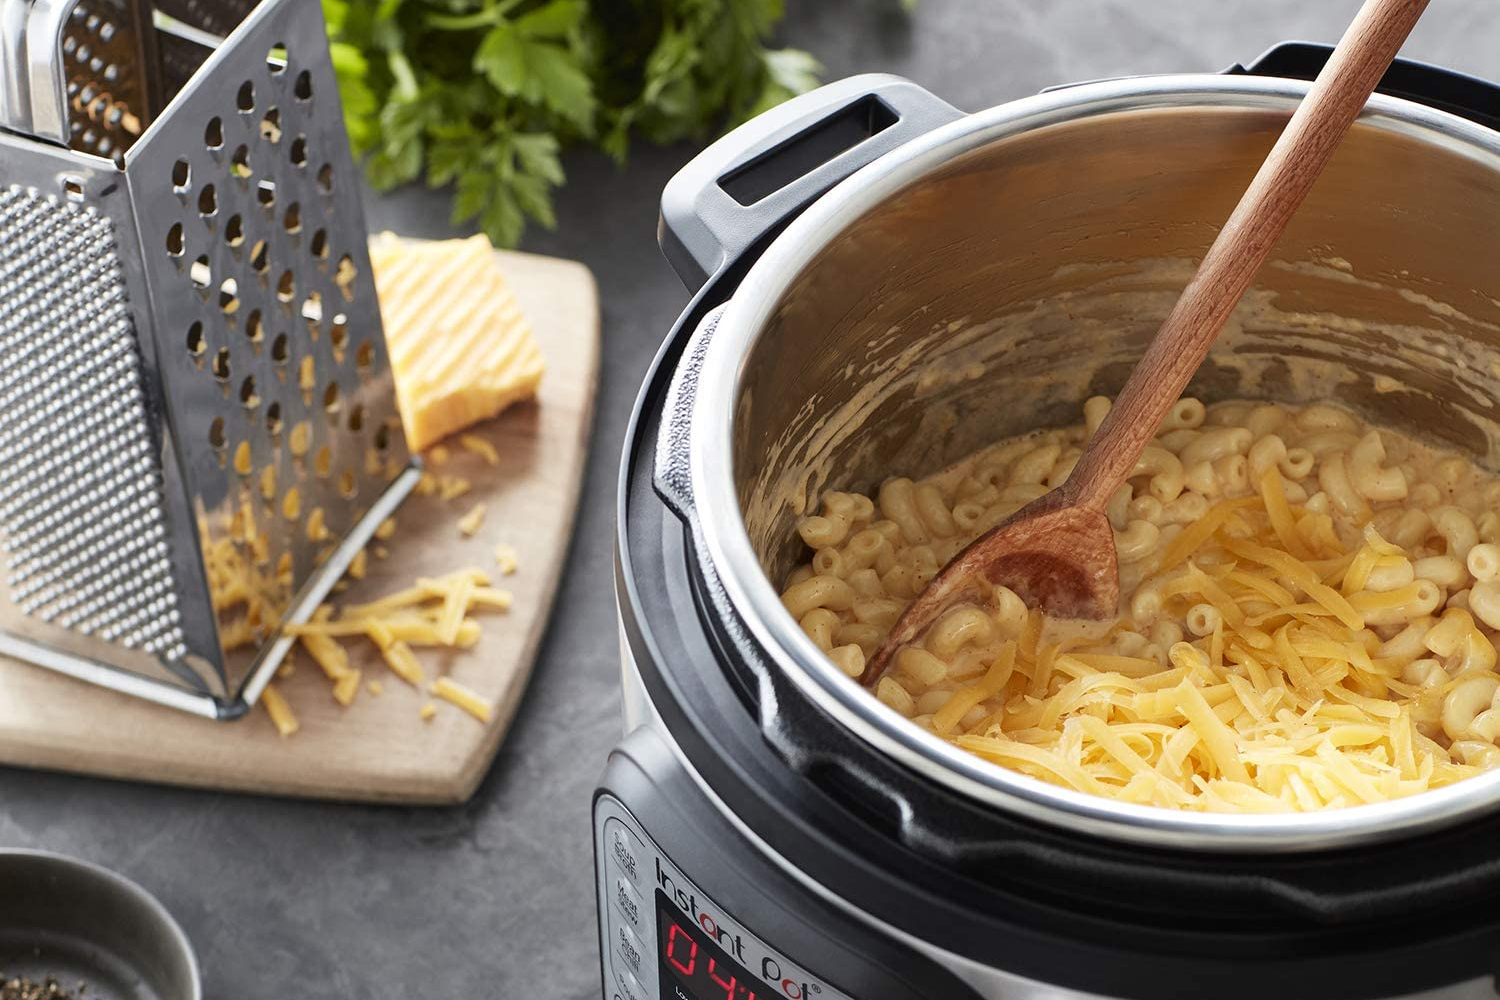 Best Instant Pot Accessories to Buy (and AVOID!) in 2021